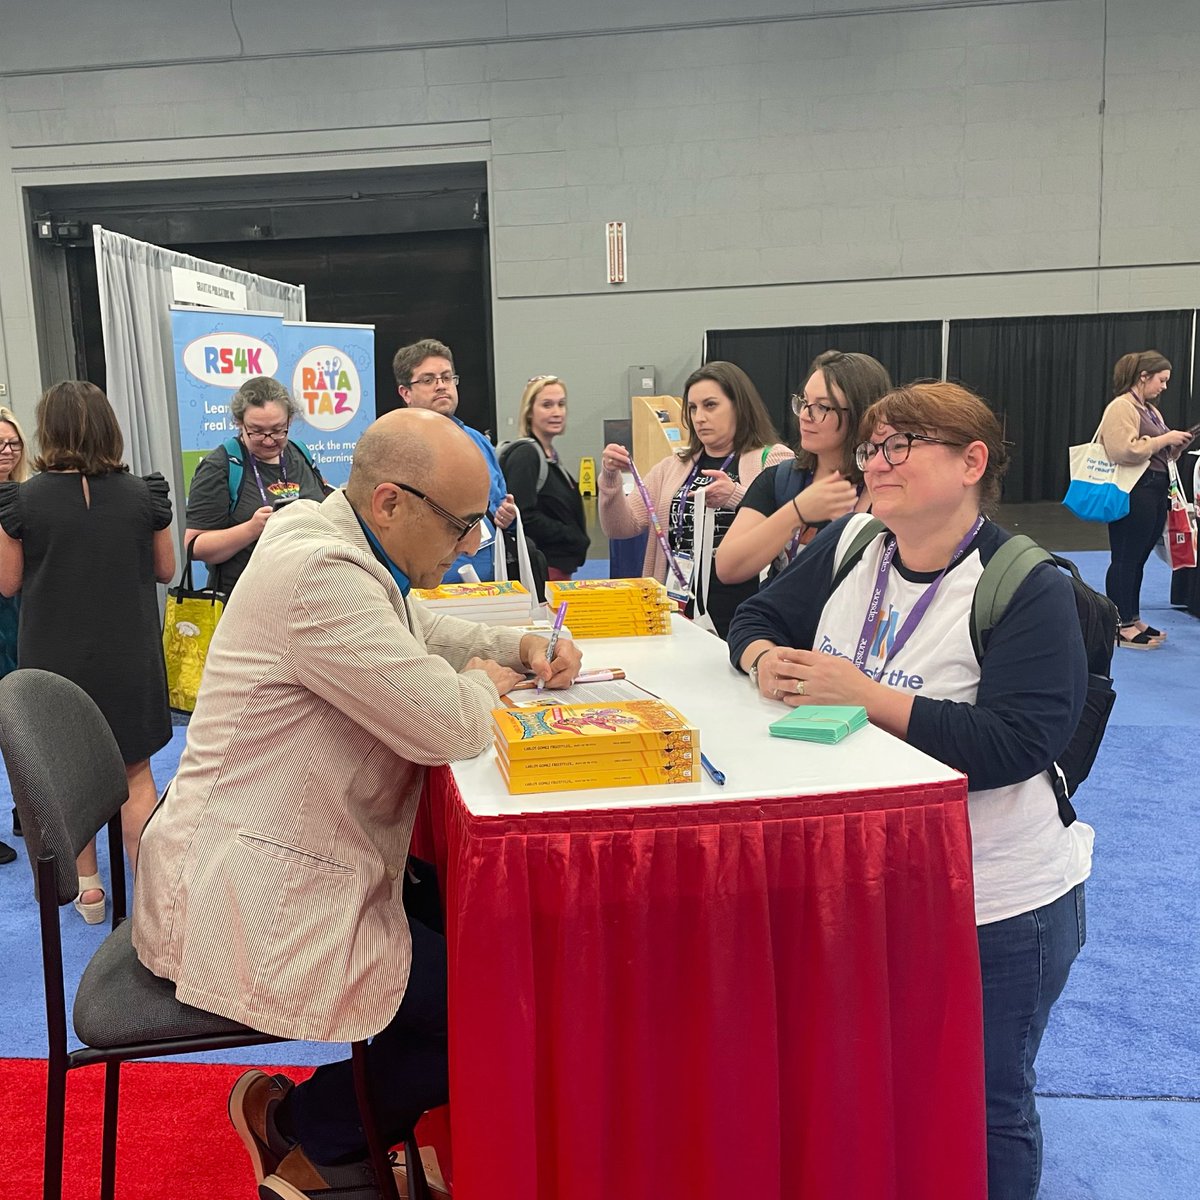 We had such a great day yesterday at #TXLA23 with Aixa Perez-Prado, Chuck Gonzales, Steve Metzger, Laura Seely-Pollack, and so many amazing people who visited booth #1734! We're so excited for another day of fun! #TLA23 #TLA